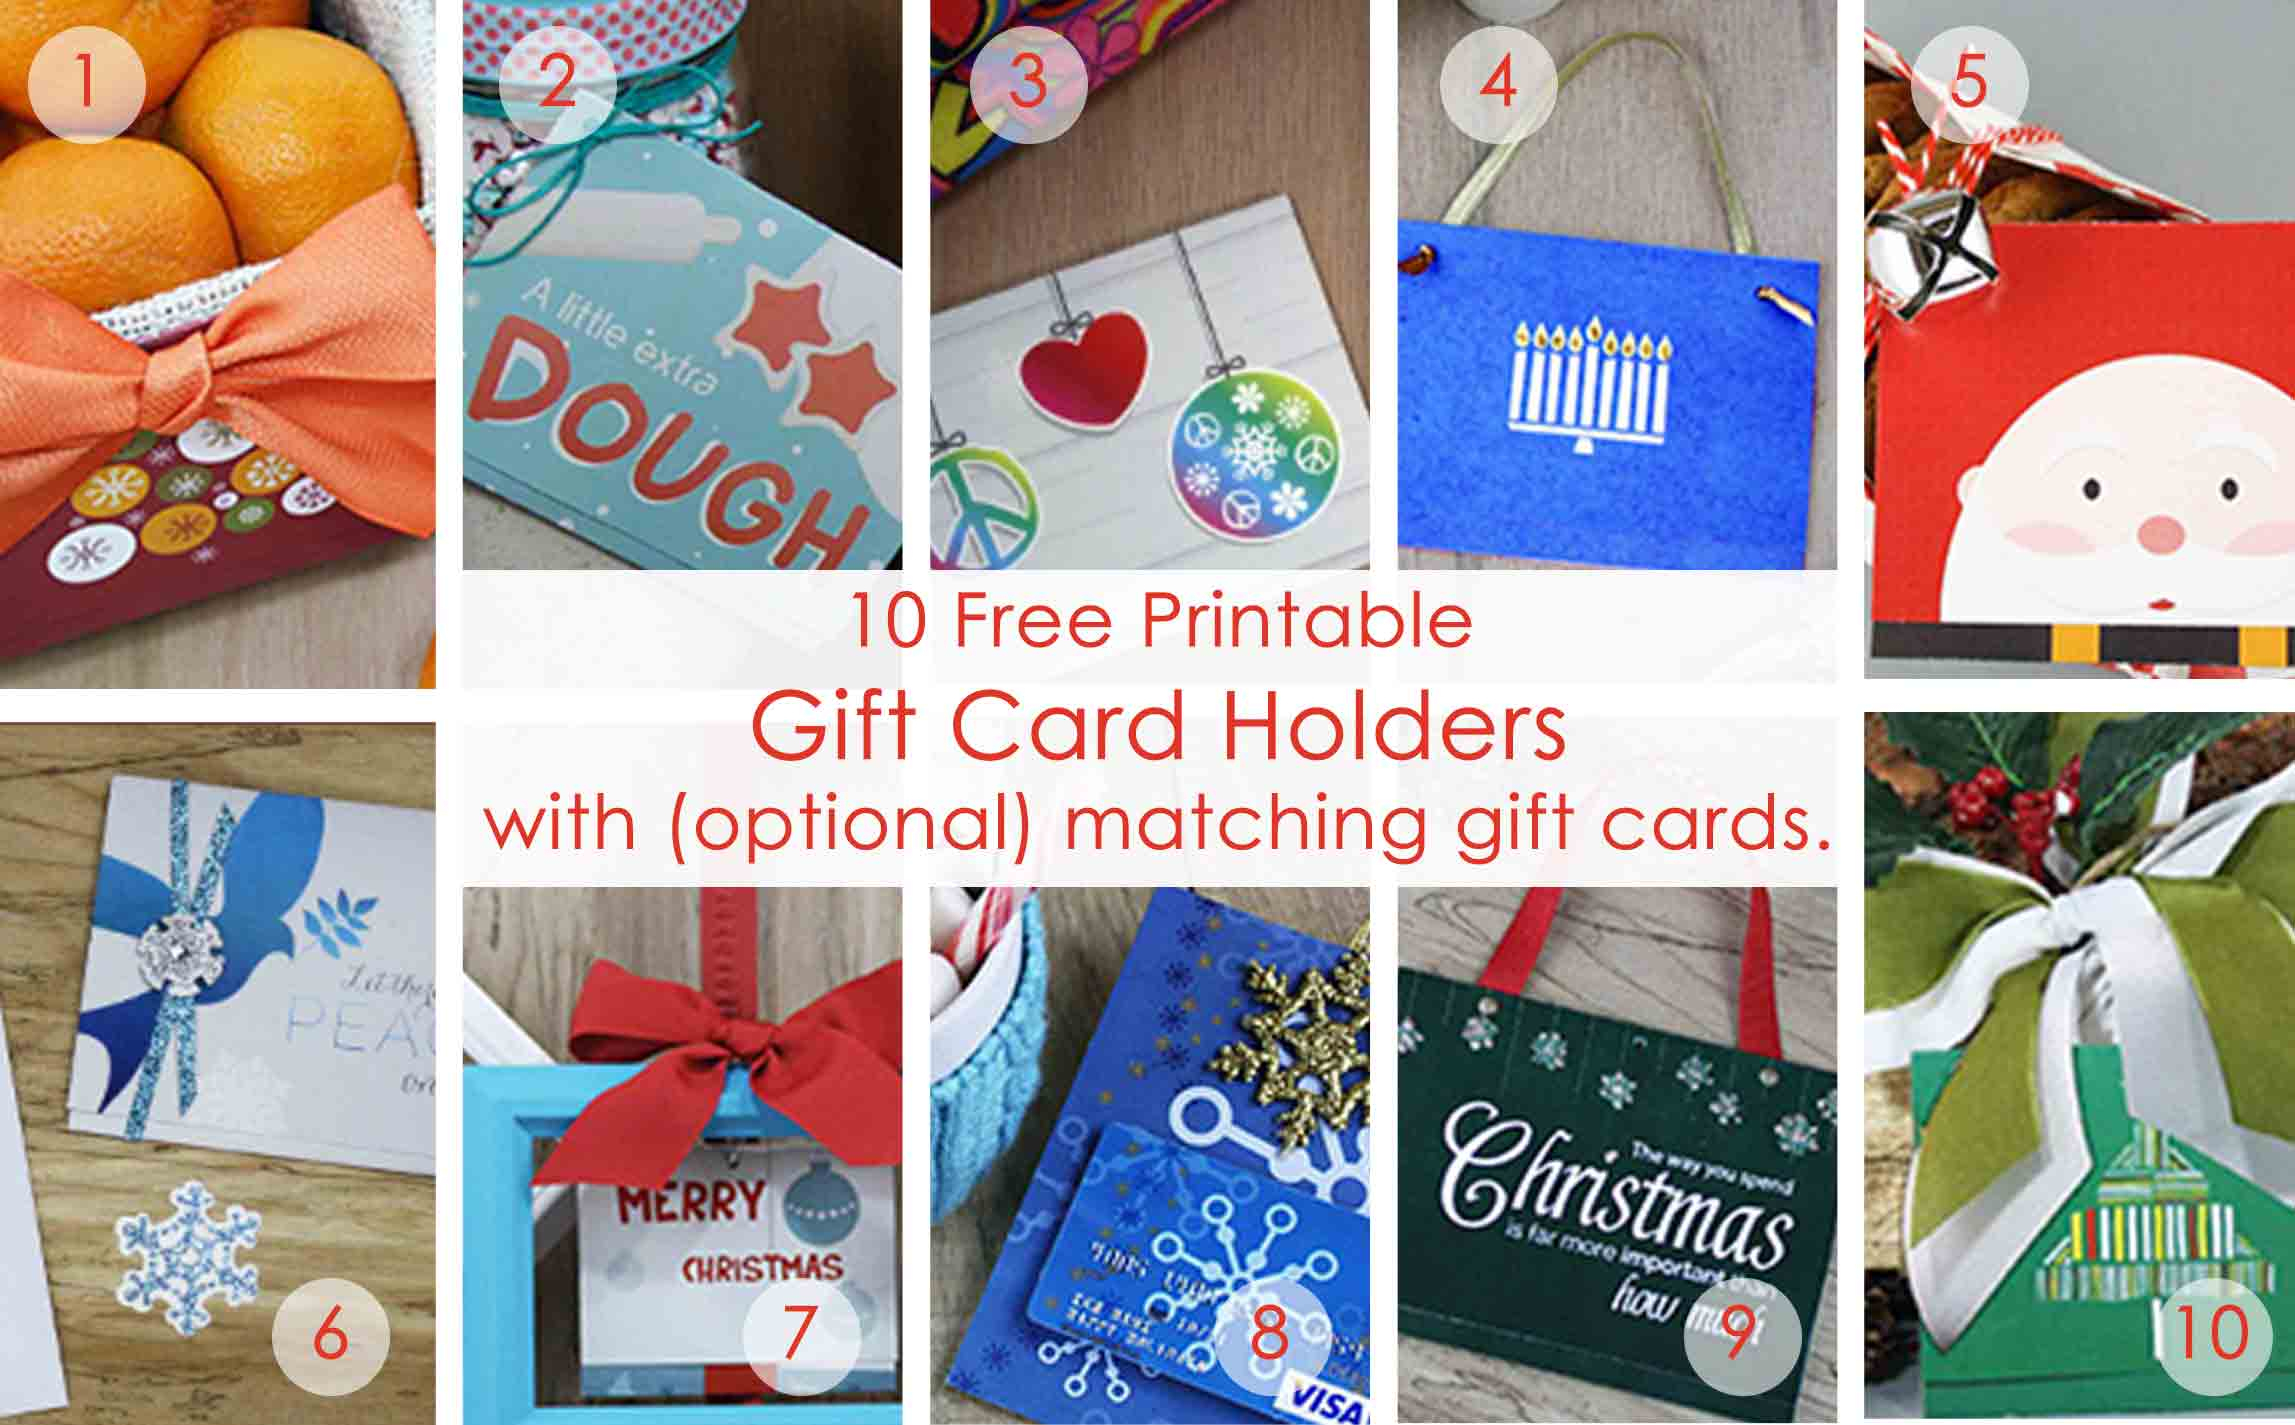 Over 50 Printable Gift Card Holders For The Holidays | Gcg - Free Printable Gift Card Envelope Template